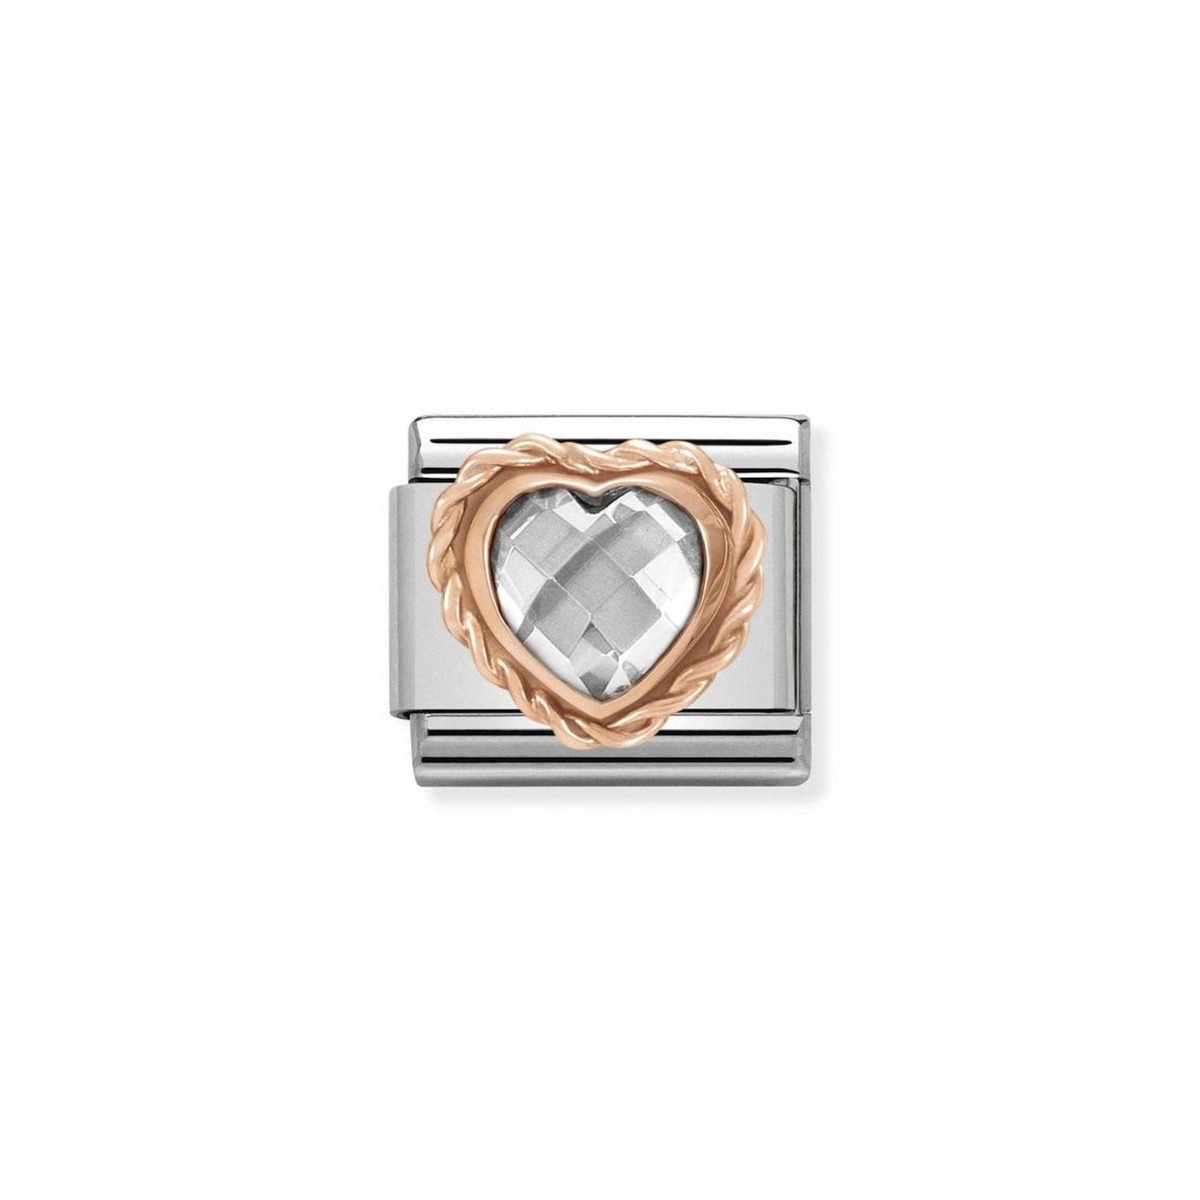 Nomination Classic Heart Rose Gold Charm with White Stone